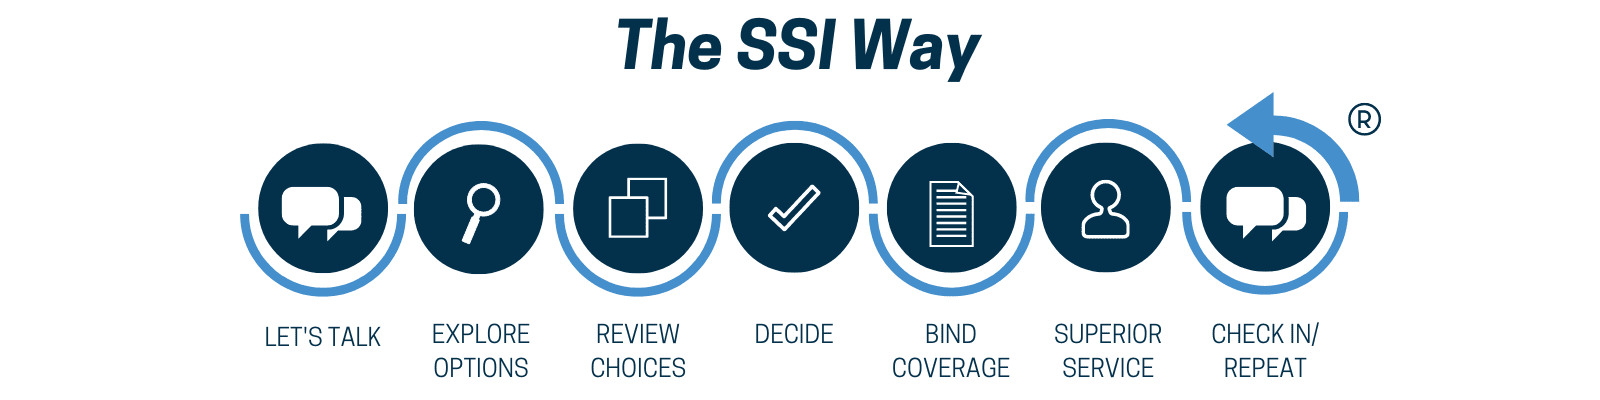 The-SSI-Way